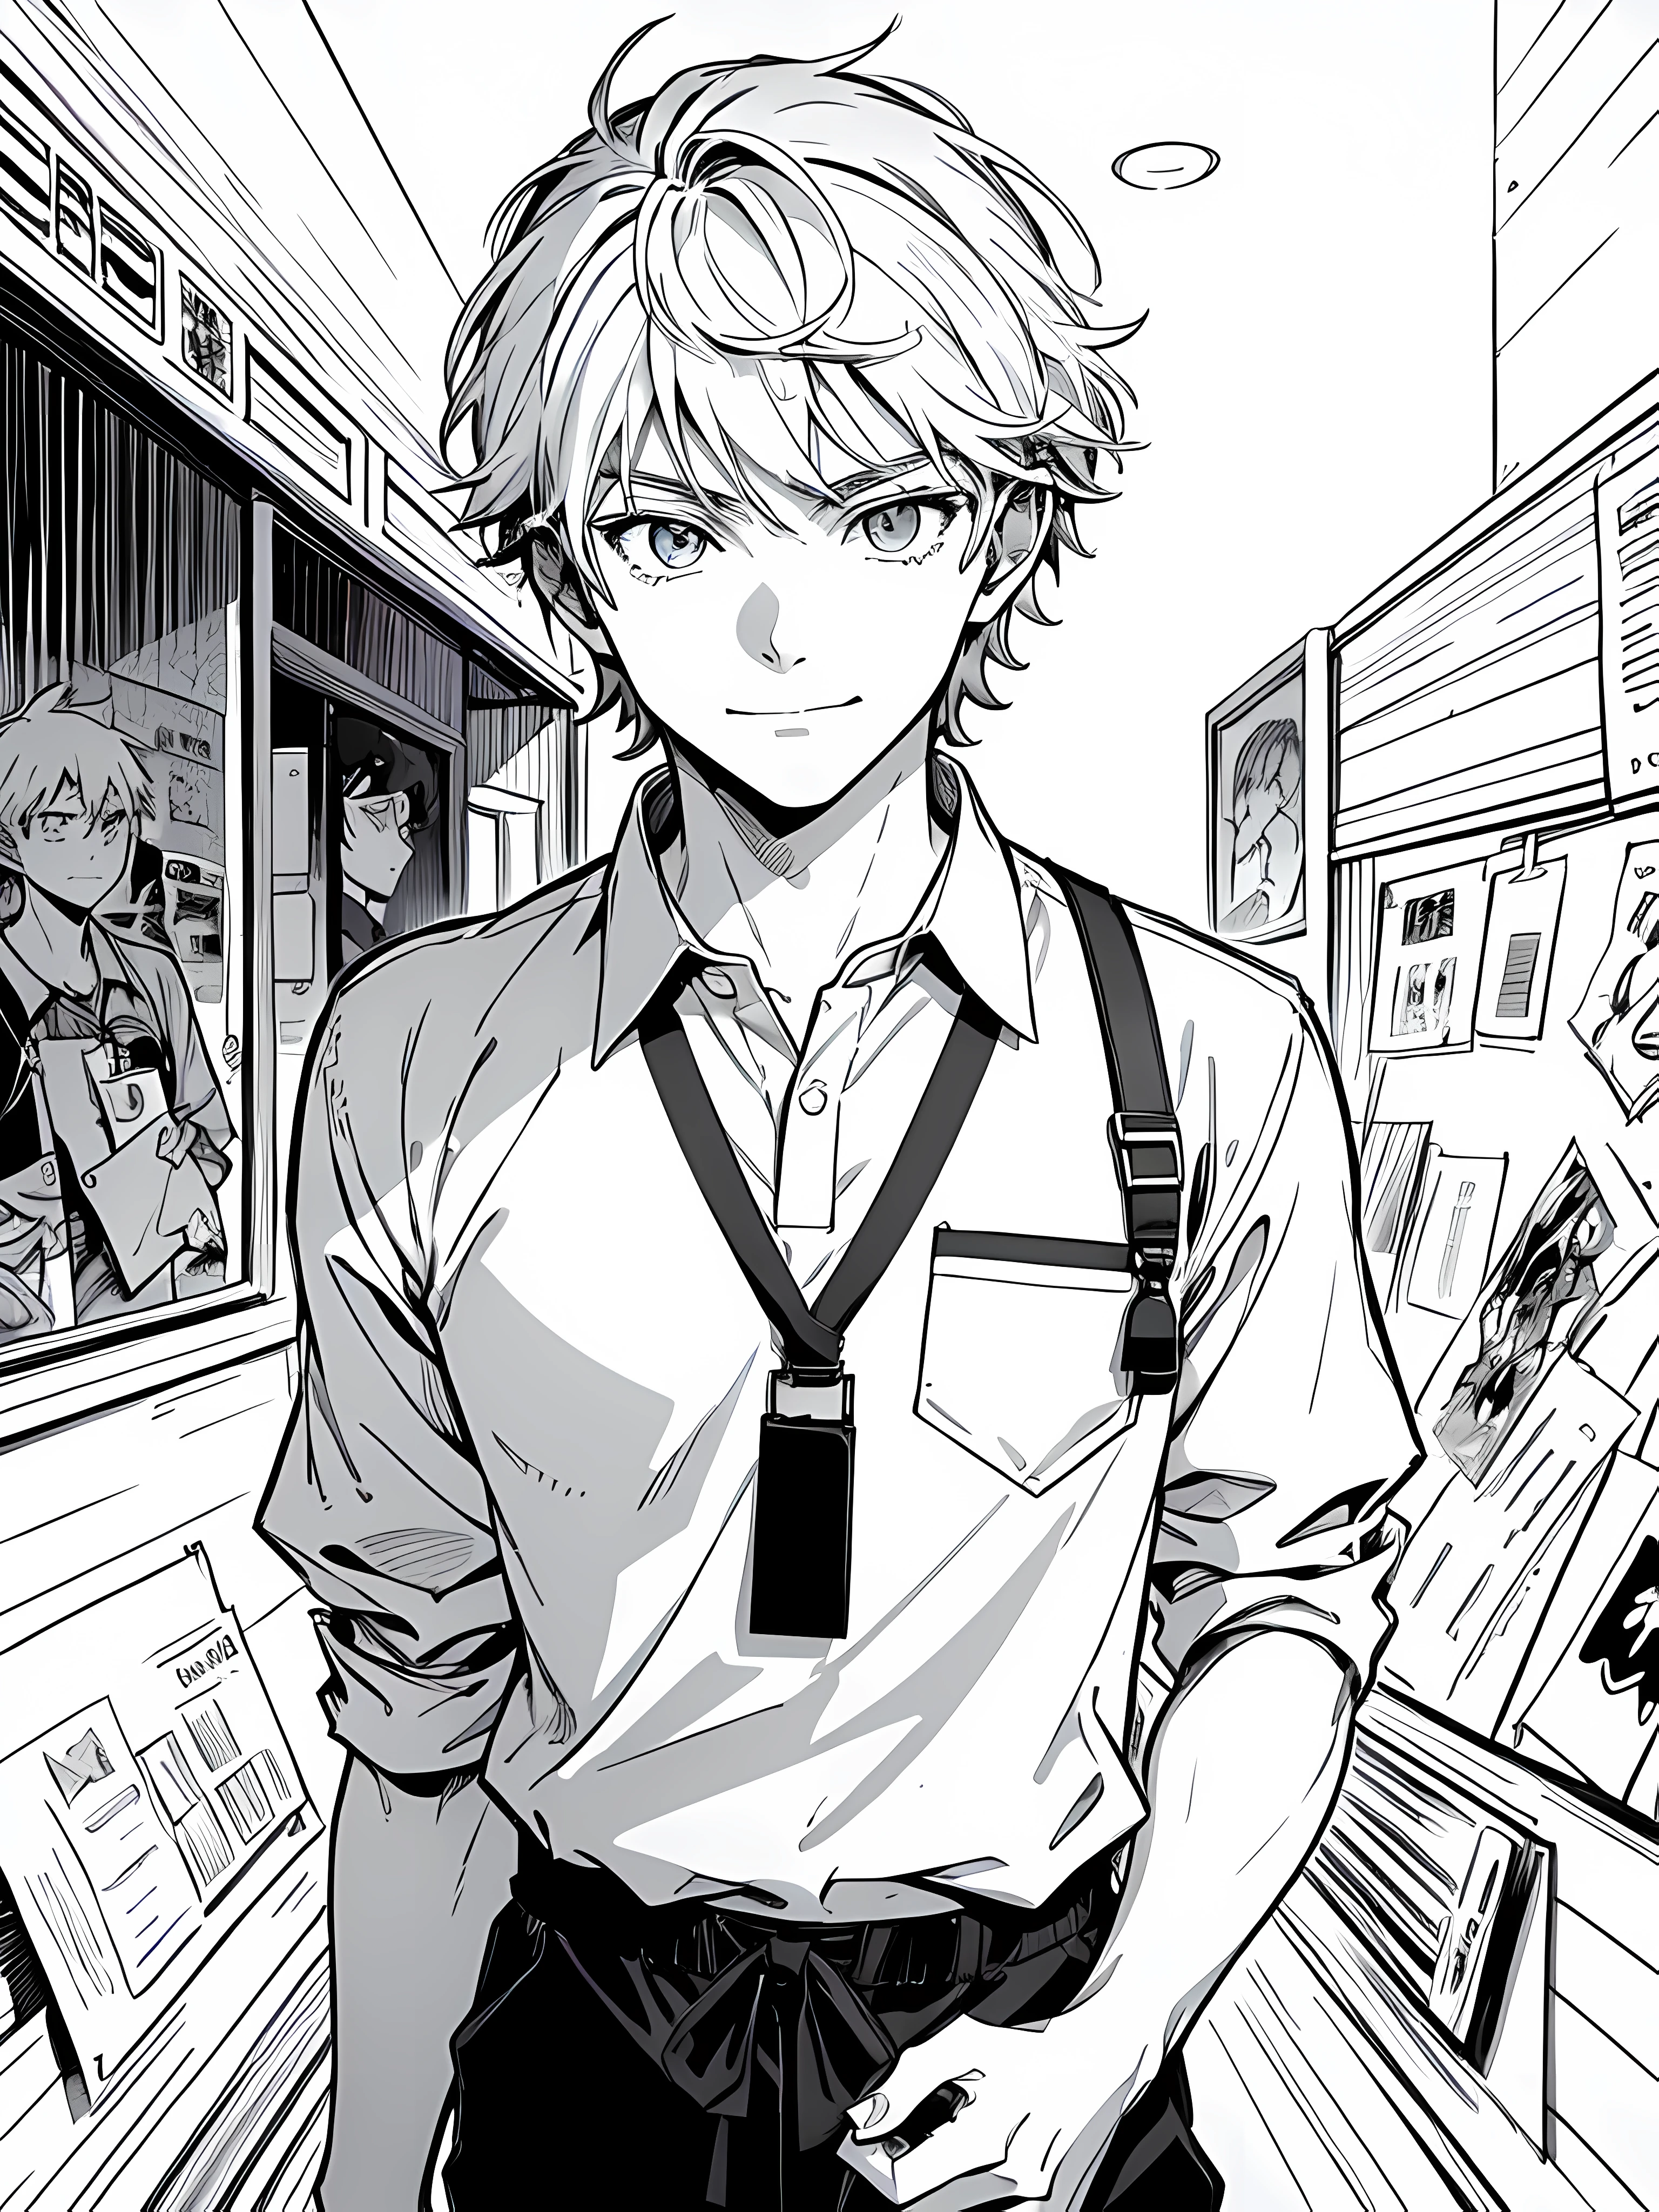 man, male, age 18, solo, face, very close up, looking at the camera, body towards camera, facing camera, serious eyes, calming face, slightly smile mouth, speaking mouth, wearing polo, wearing ID sling, wearing lanyard, ID holder, lineart, manga, manga art, comic, black and white art, monochrome, room background, clear background, white background